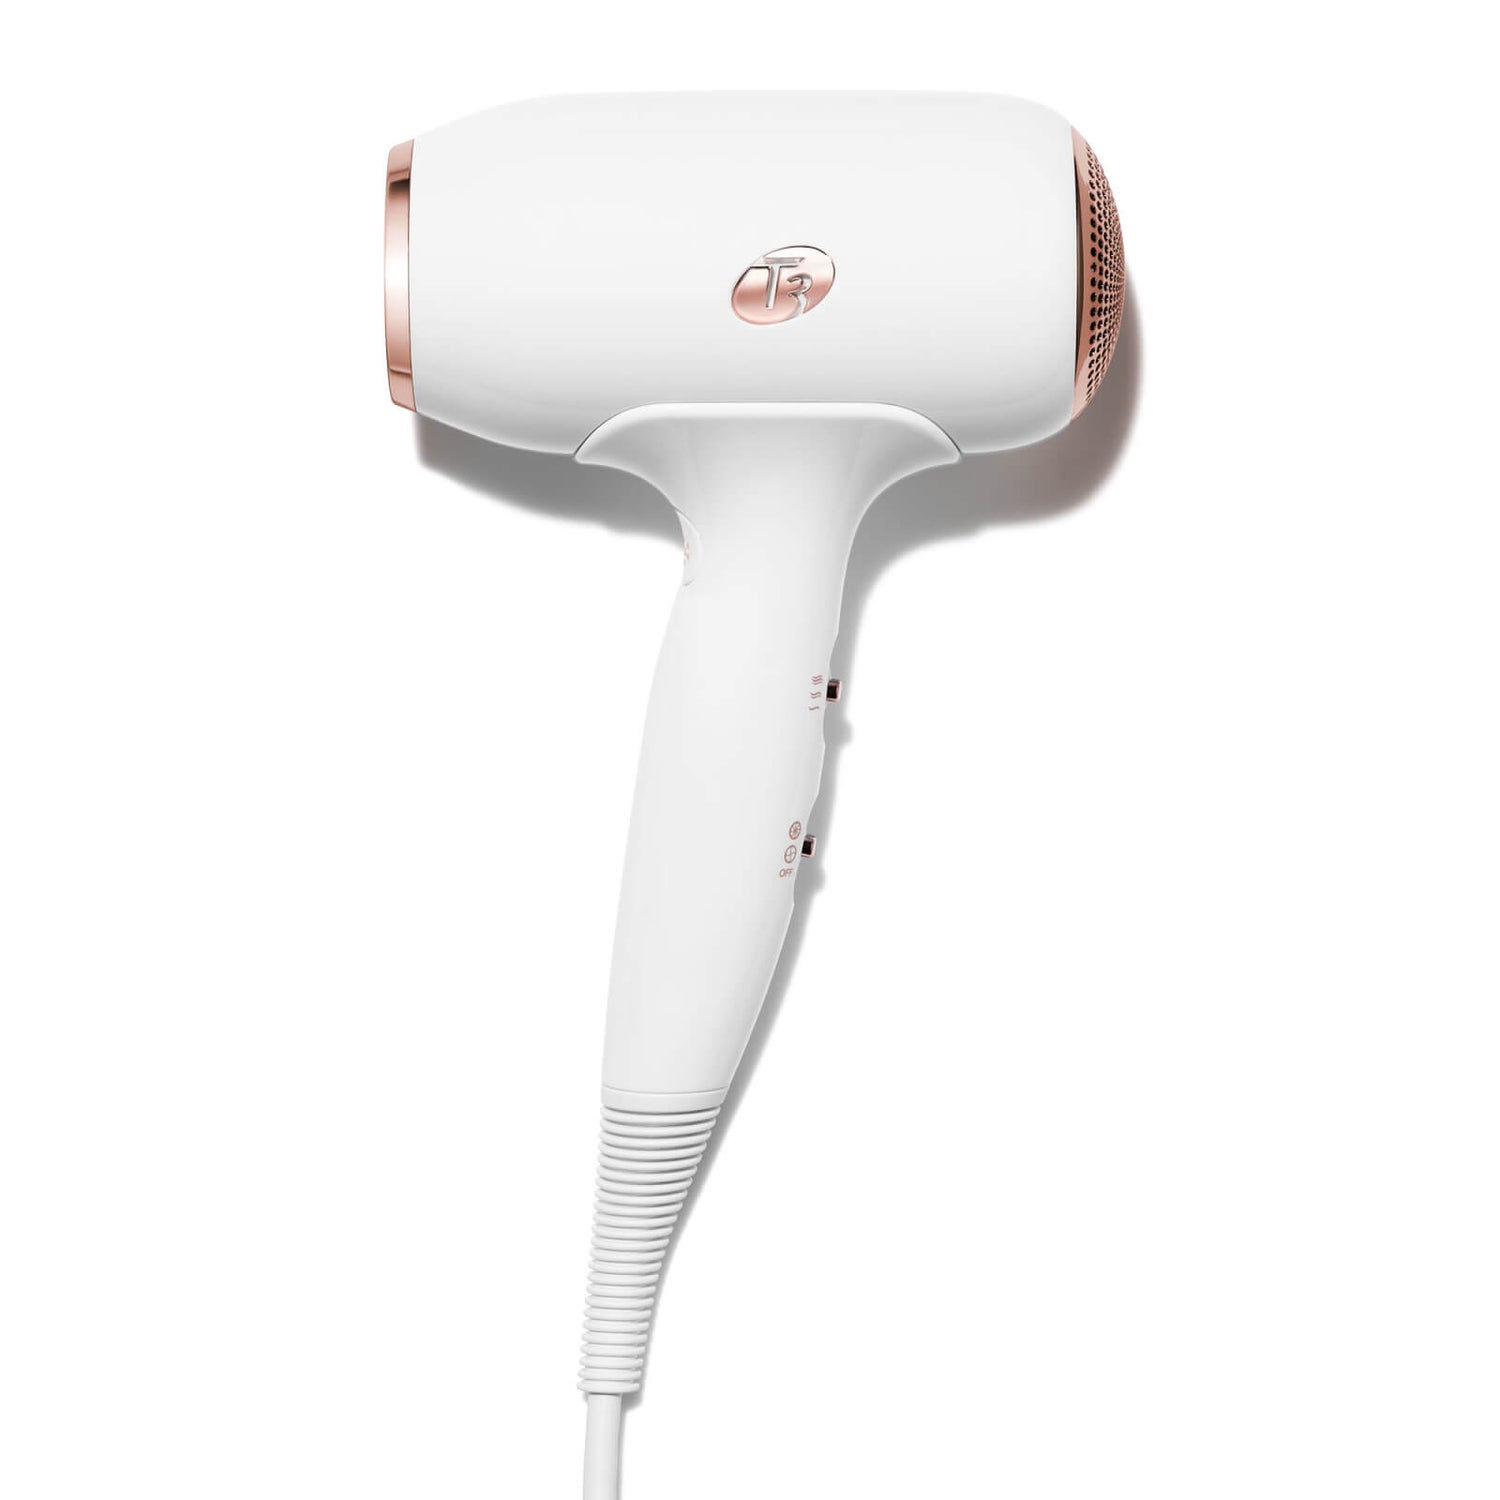 T3 Fit Compact Hair Dryer - White